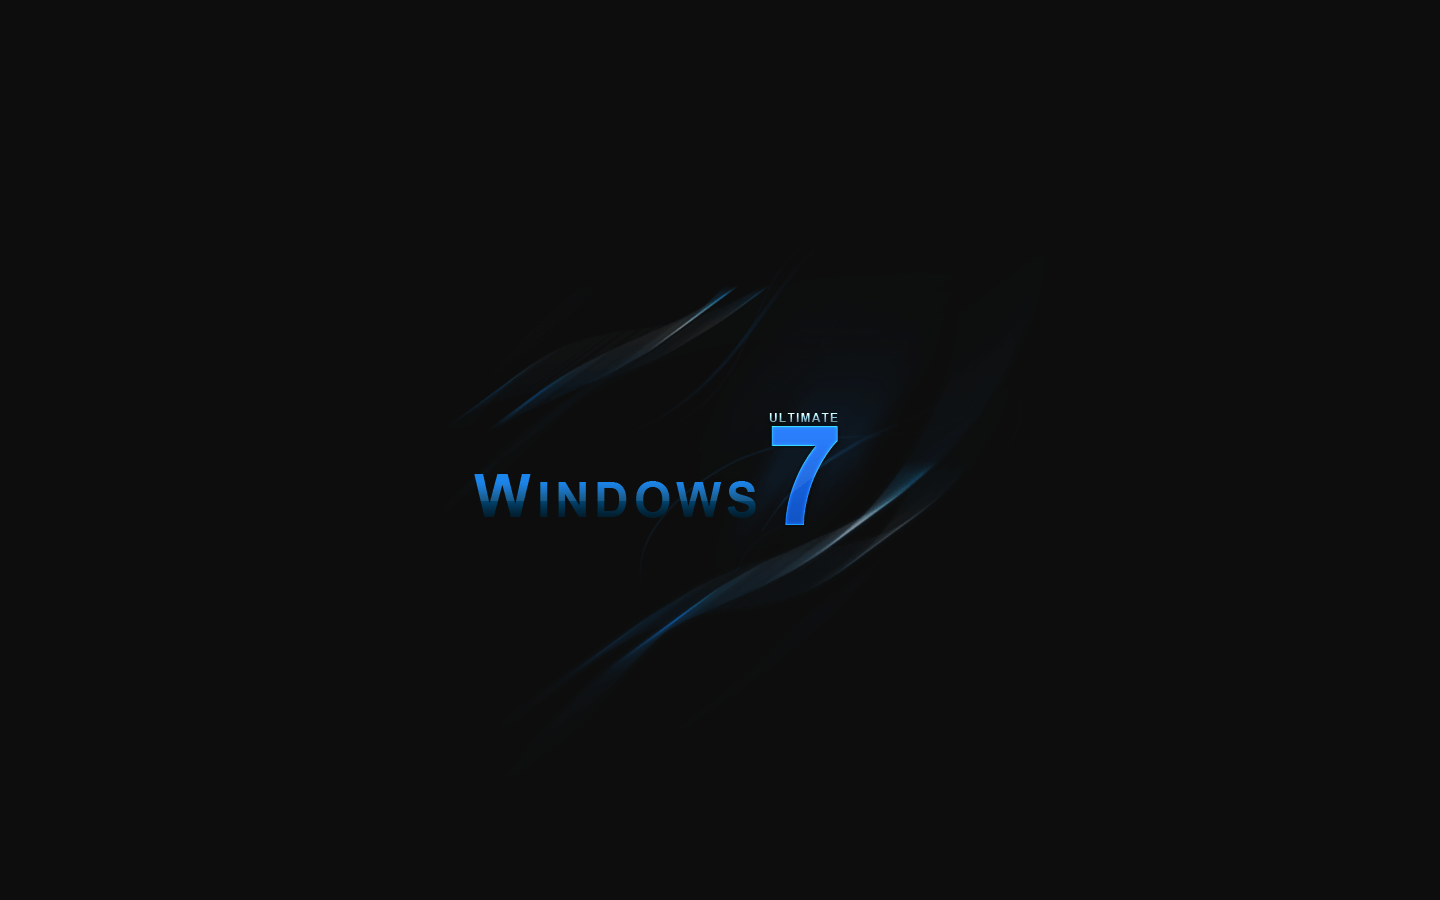 Wallpapers For > Windows 7 Backgrounds Black